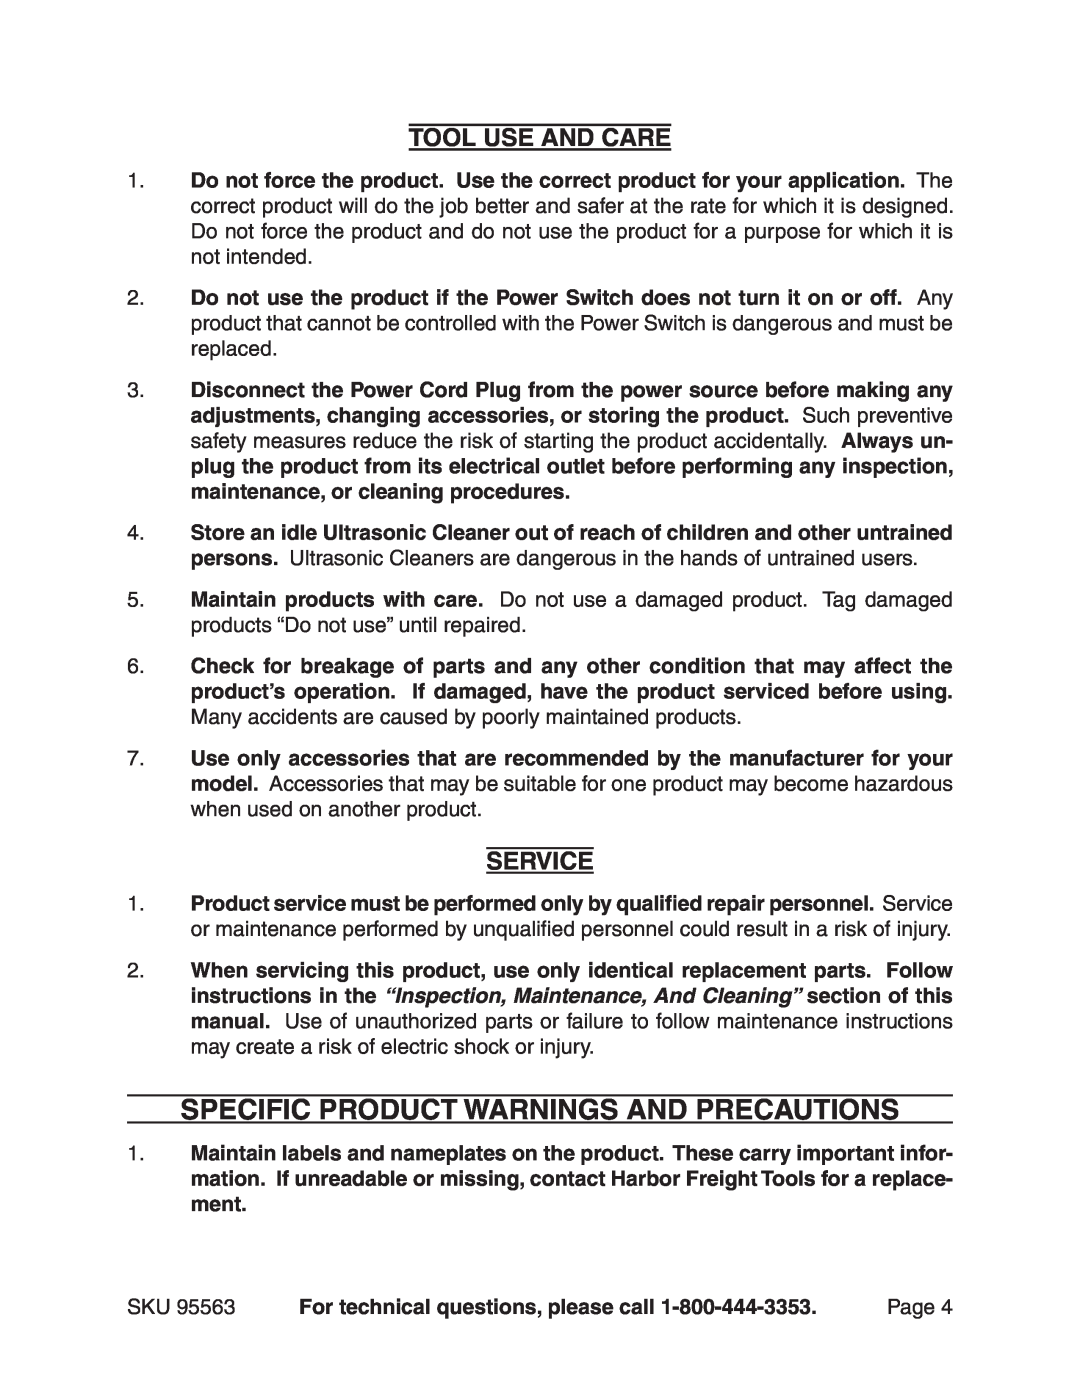 Chicago Electric 95563 manual SPECIFIC product warnings and precautions, Tool Use And Care, Service 